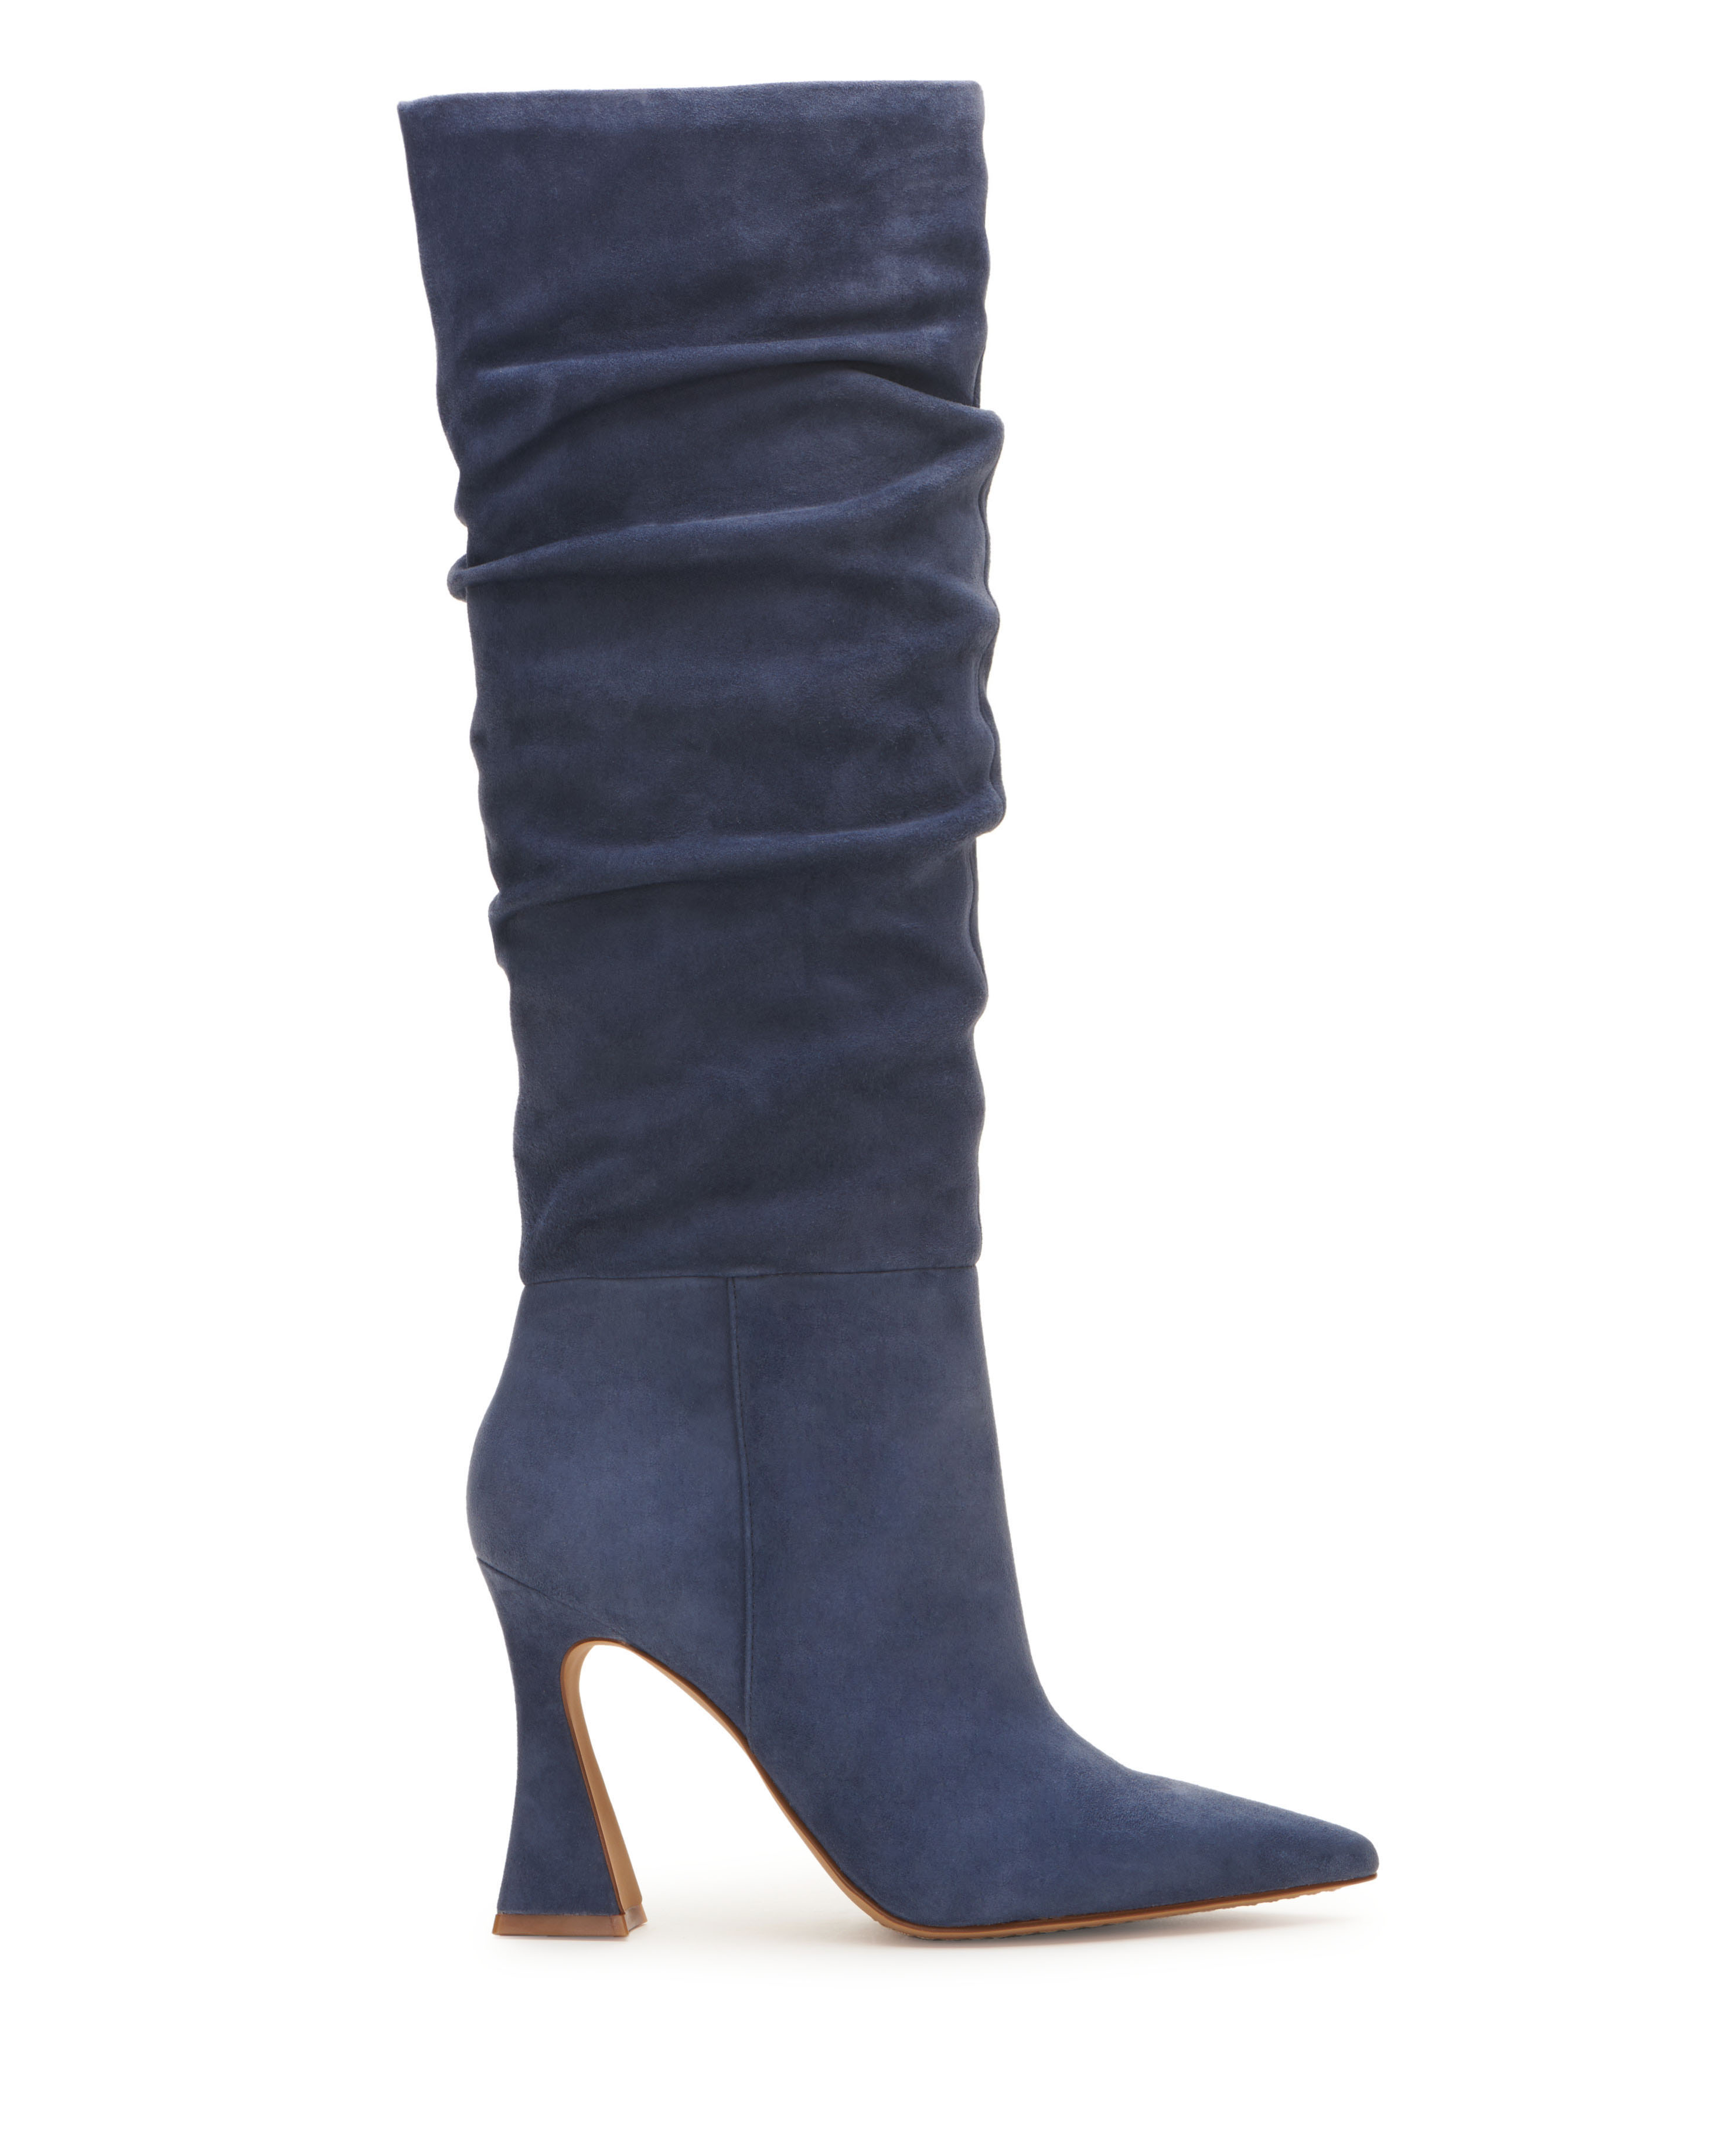 Women's Vince Camuto Alinkay Boots Size 11 Blue Slate Suede